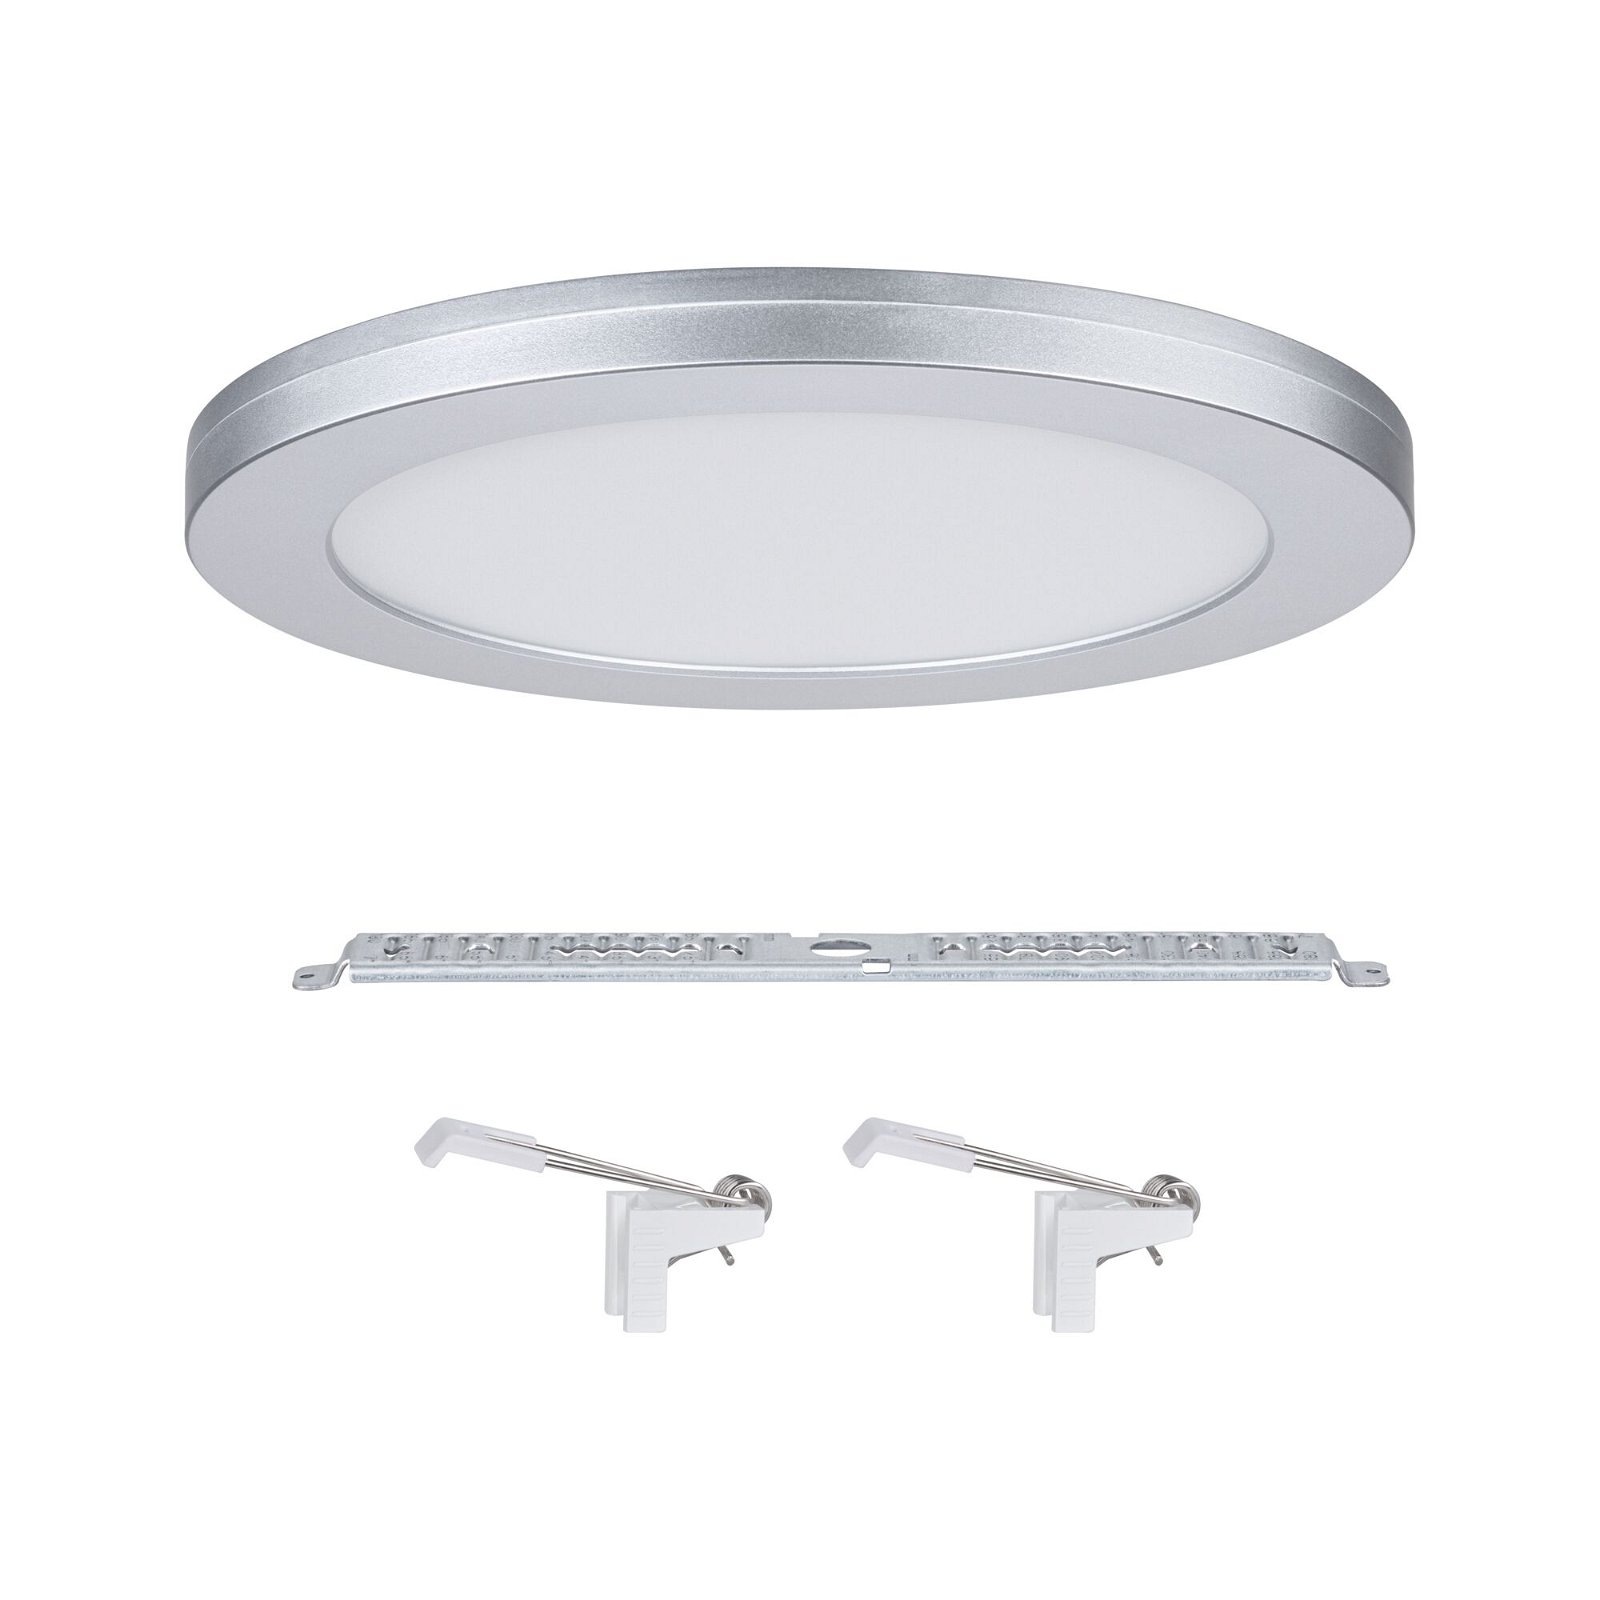 LED Recessed panel 2in1 Cover-it round 225mm 16,5W 1200lm 4000K Chrome matt